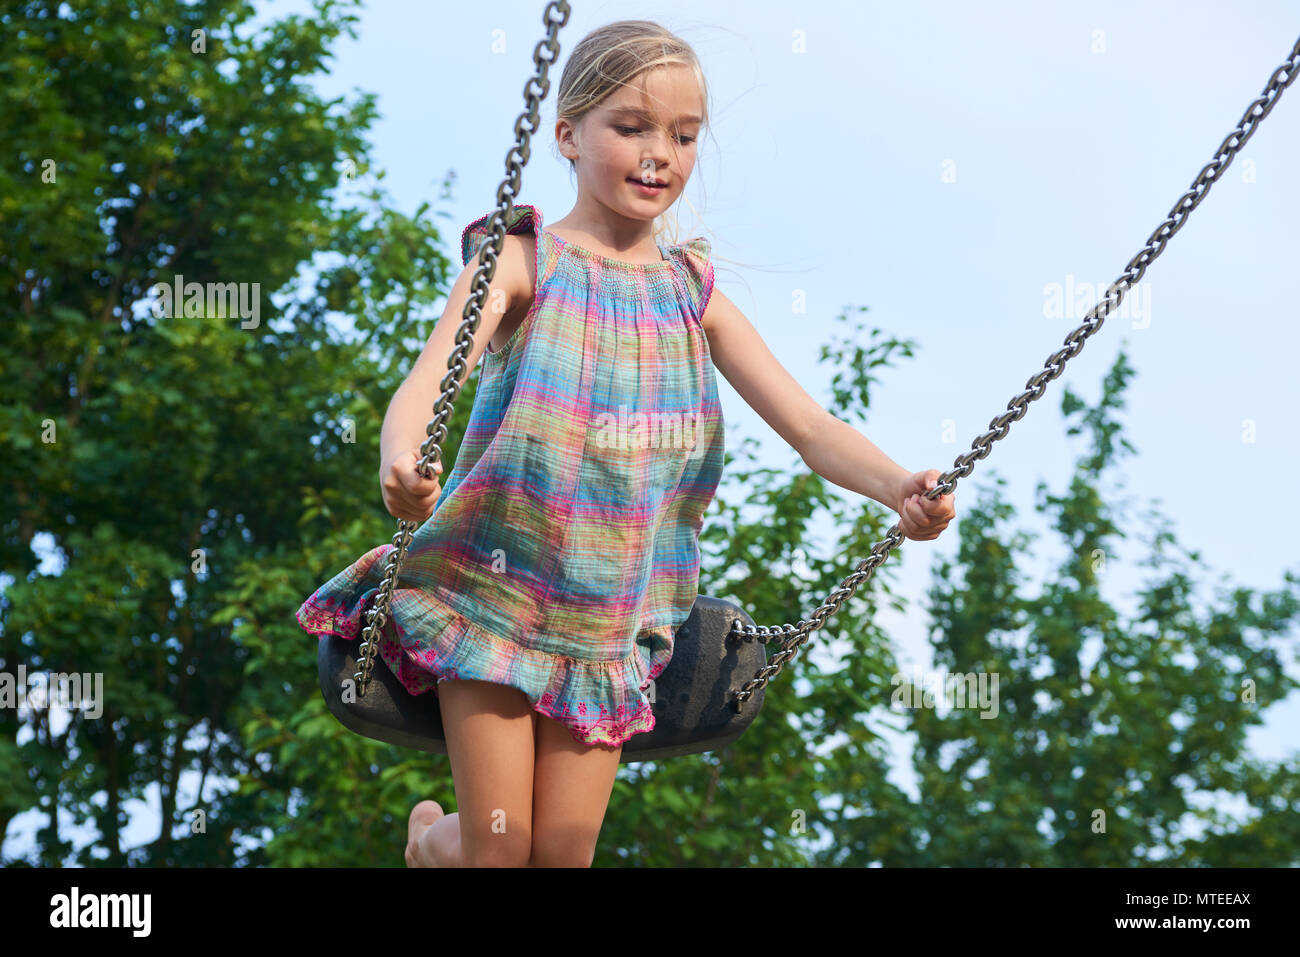 Little child blond girl having fun on a swing outdoor. Summer playground. Girl swinging high. Young child on swing outdoors. Stock Photo